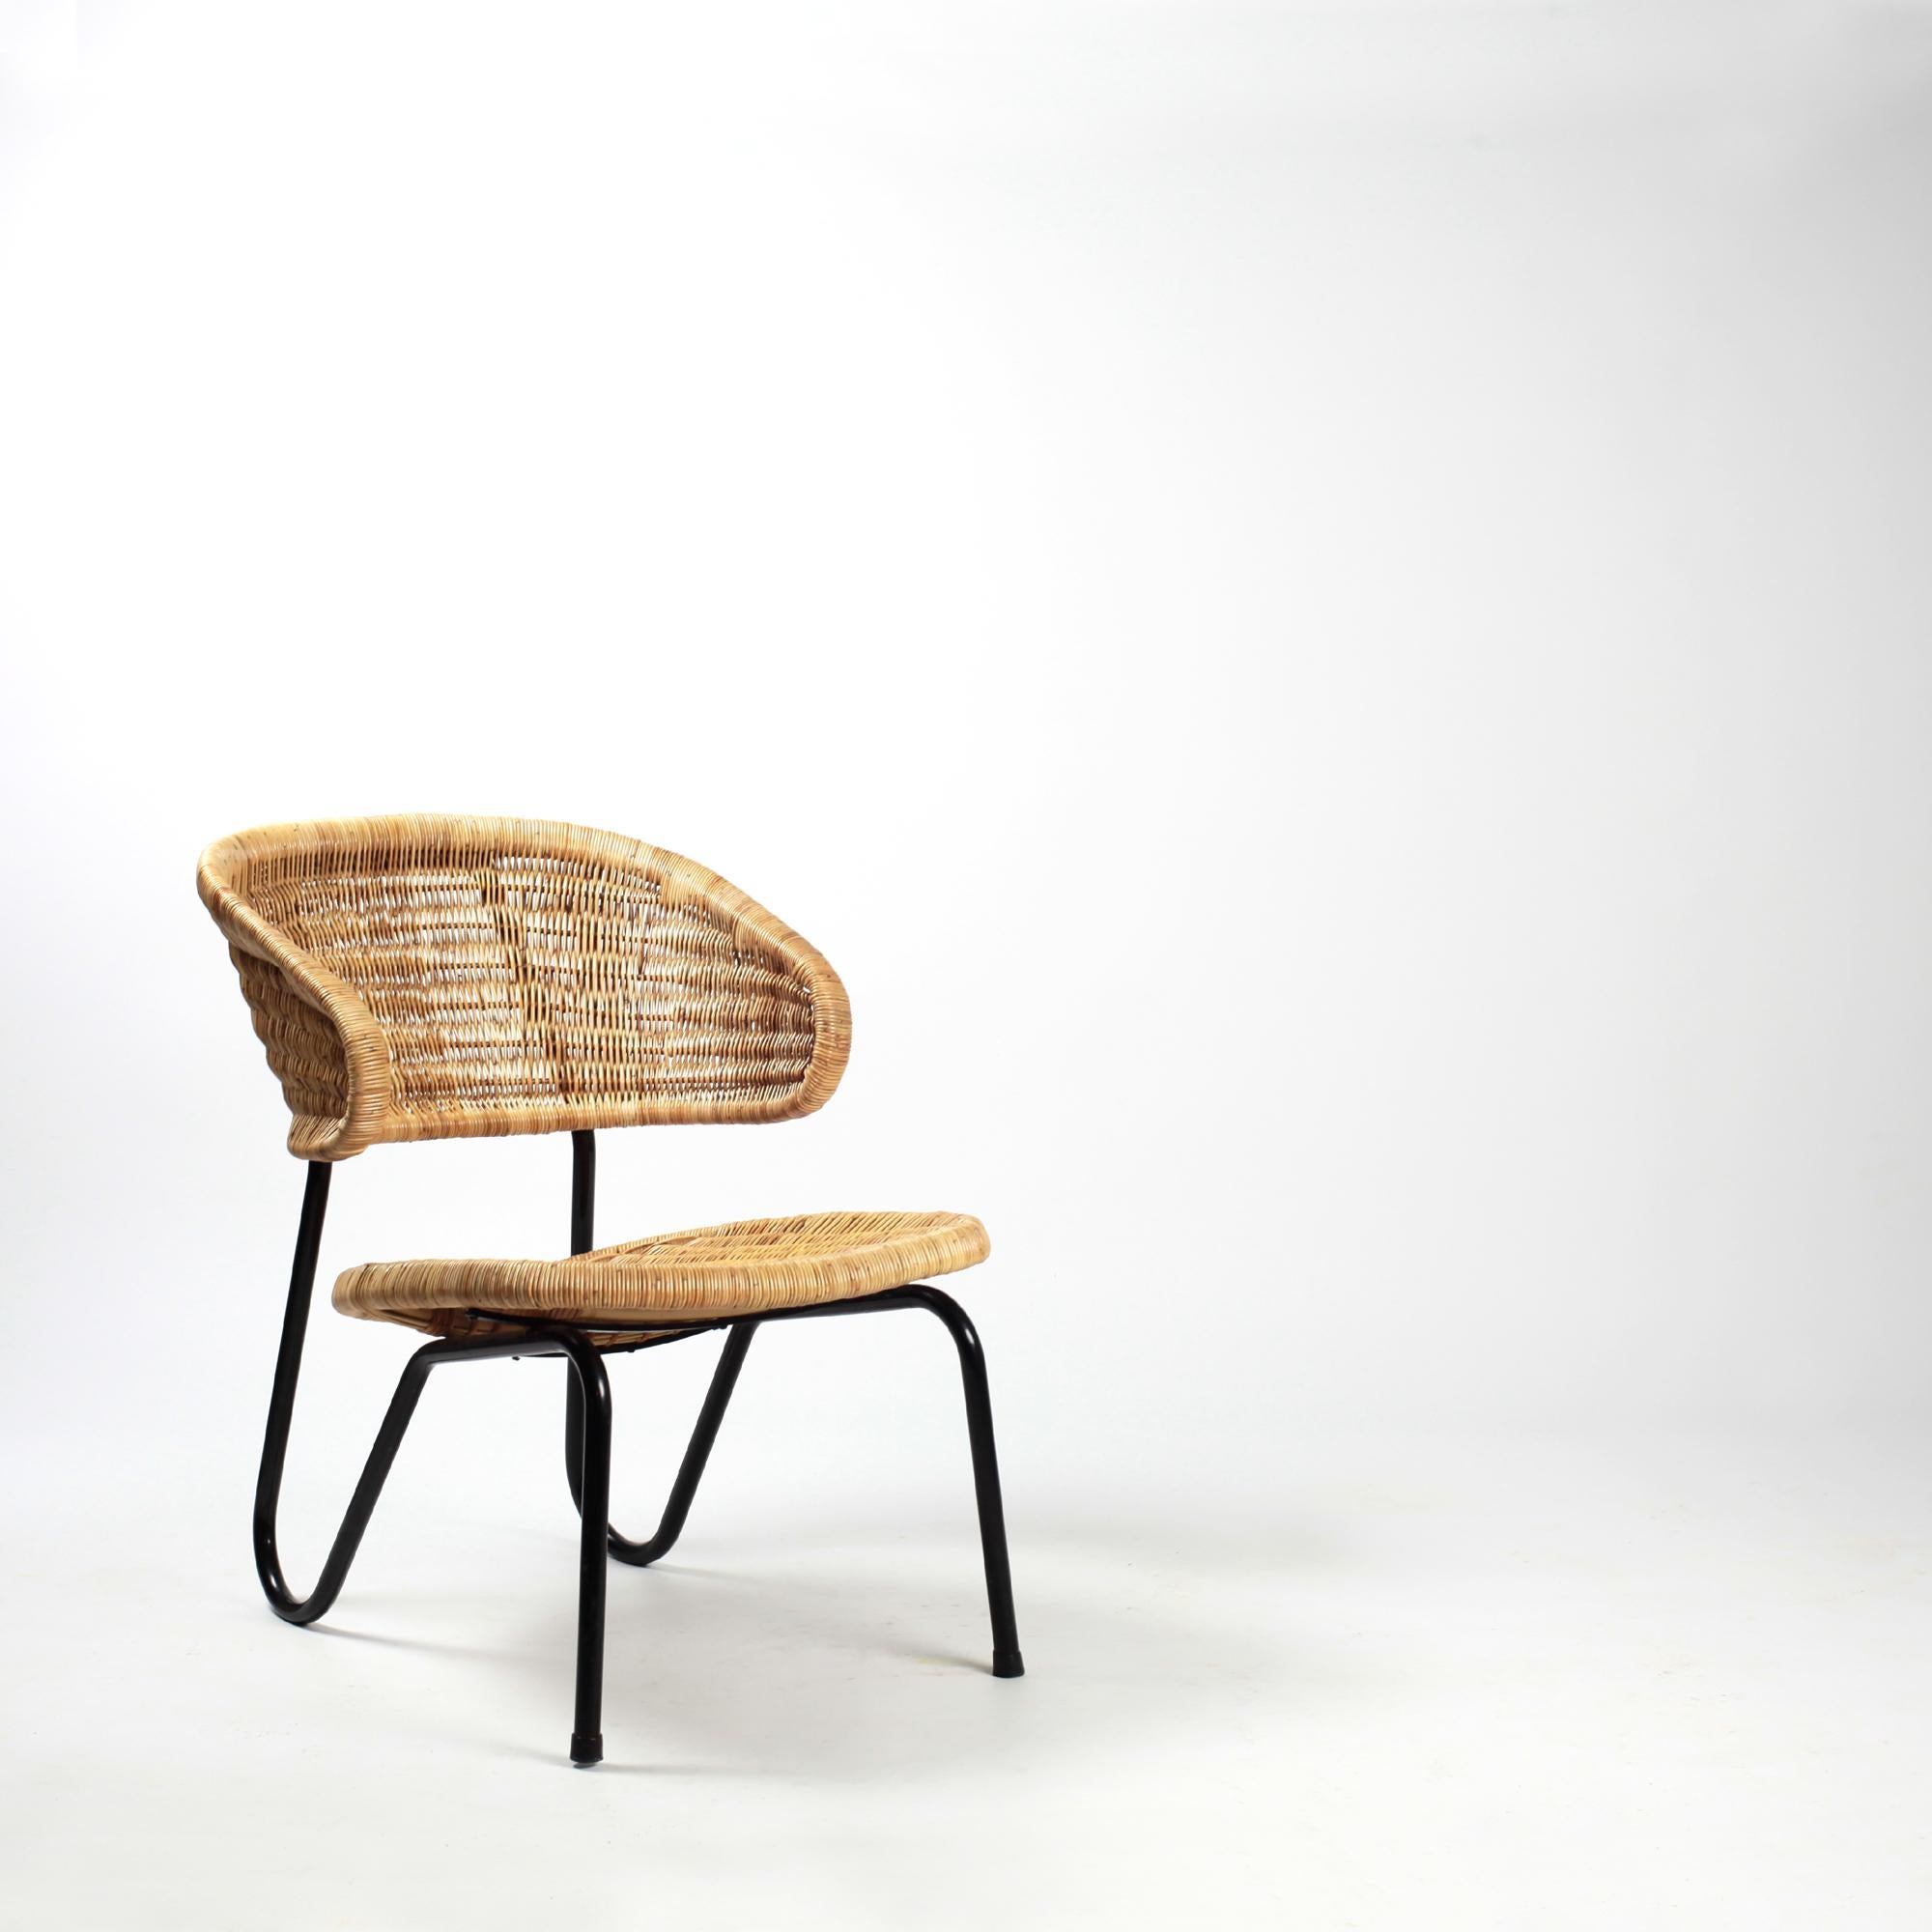 Rare Dirk van Sliedregt rattan lounge chair with Black lacquered metal leg for Gebr. Jonkers Noordwolde. Model 568 created in 1954.
Beautiful patina.
This chair is no longer manufactured.
Referenced by the Stedelijk Design Museum Amsterdam.